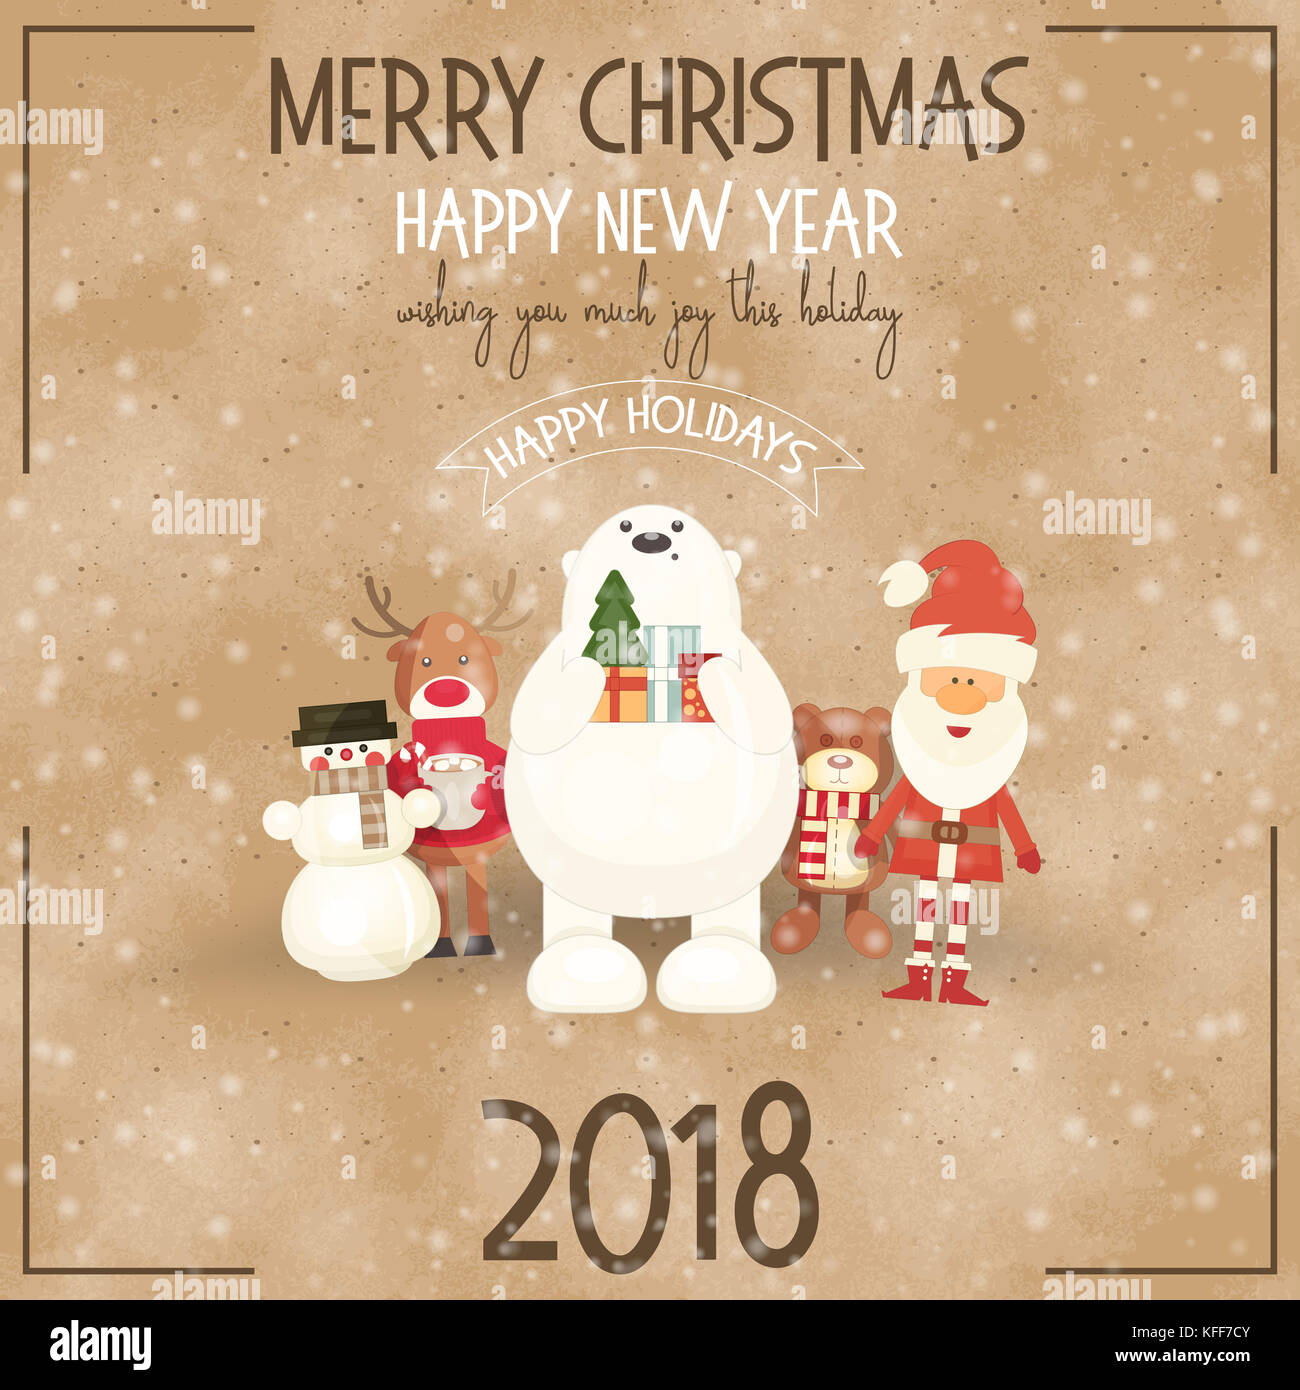 Merry Christmas Retro Greeting Card - Santa Claus and Xmas Characters on Vintage Craft Paper Background. Illustration. Square Format. Stock Photo